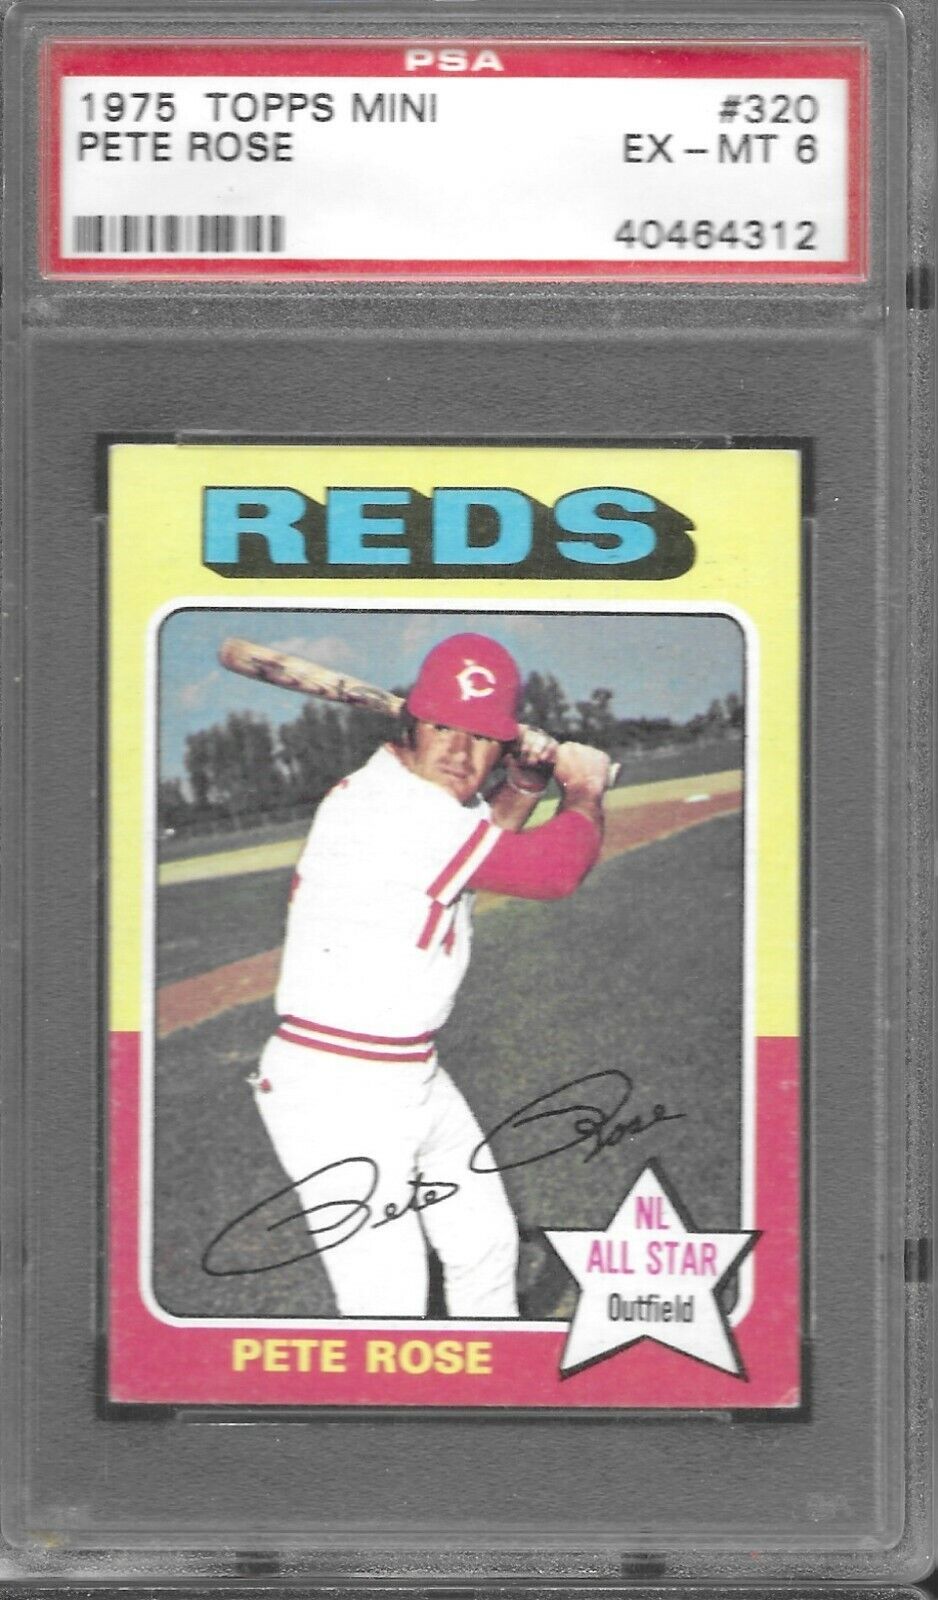 1975 75 TOPPS MINI PETE ROSE #320 PSA 6 EX - MT REDS CENTERED NICELY